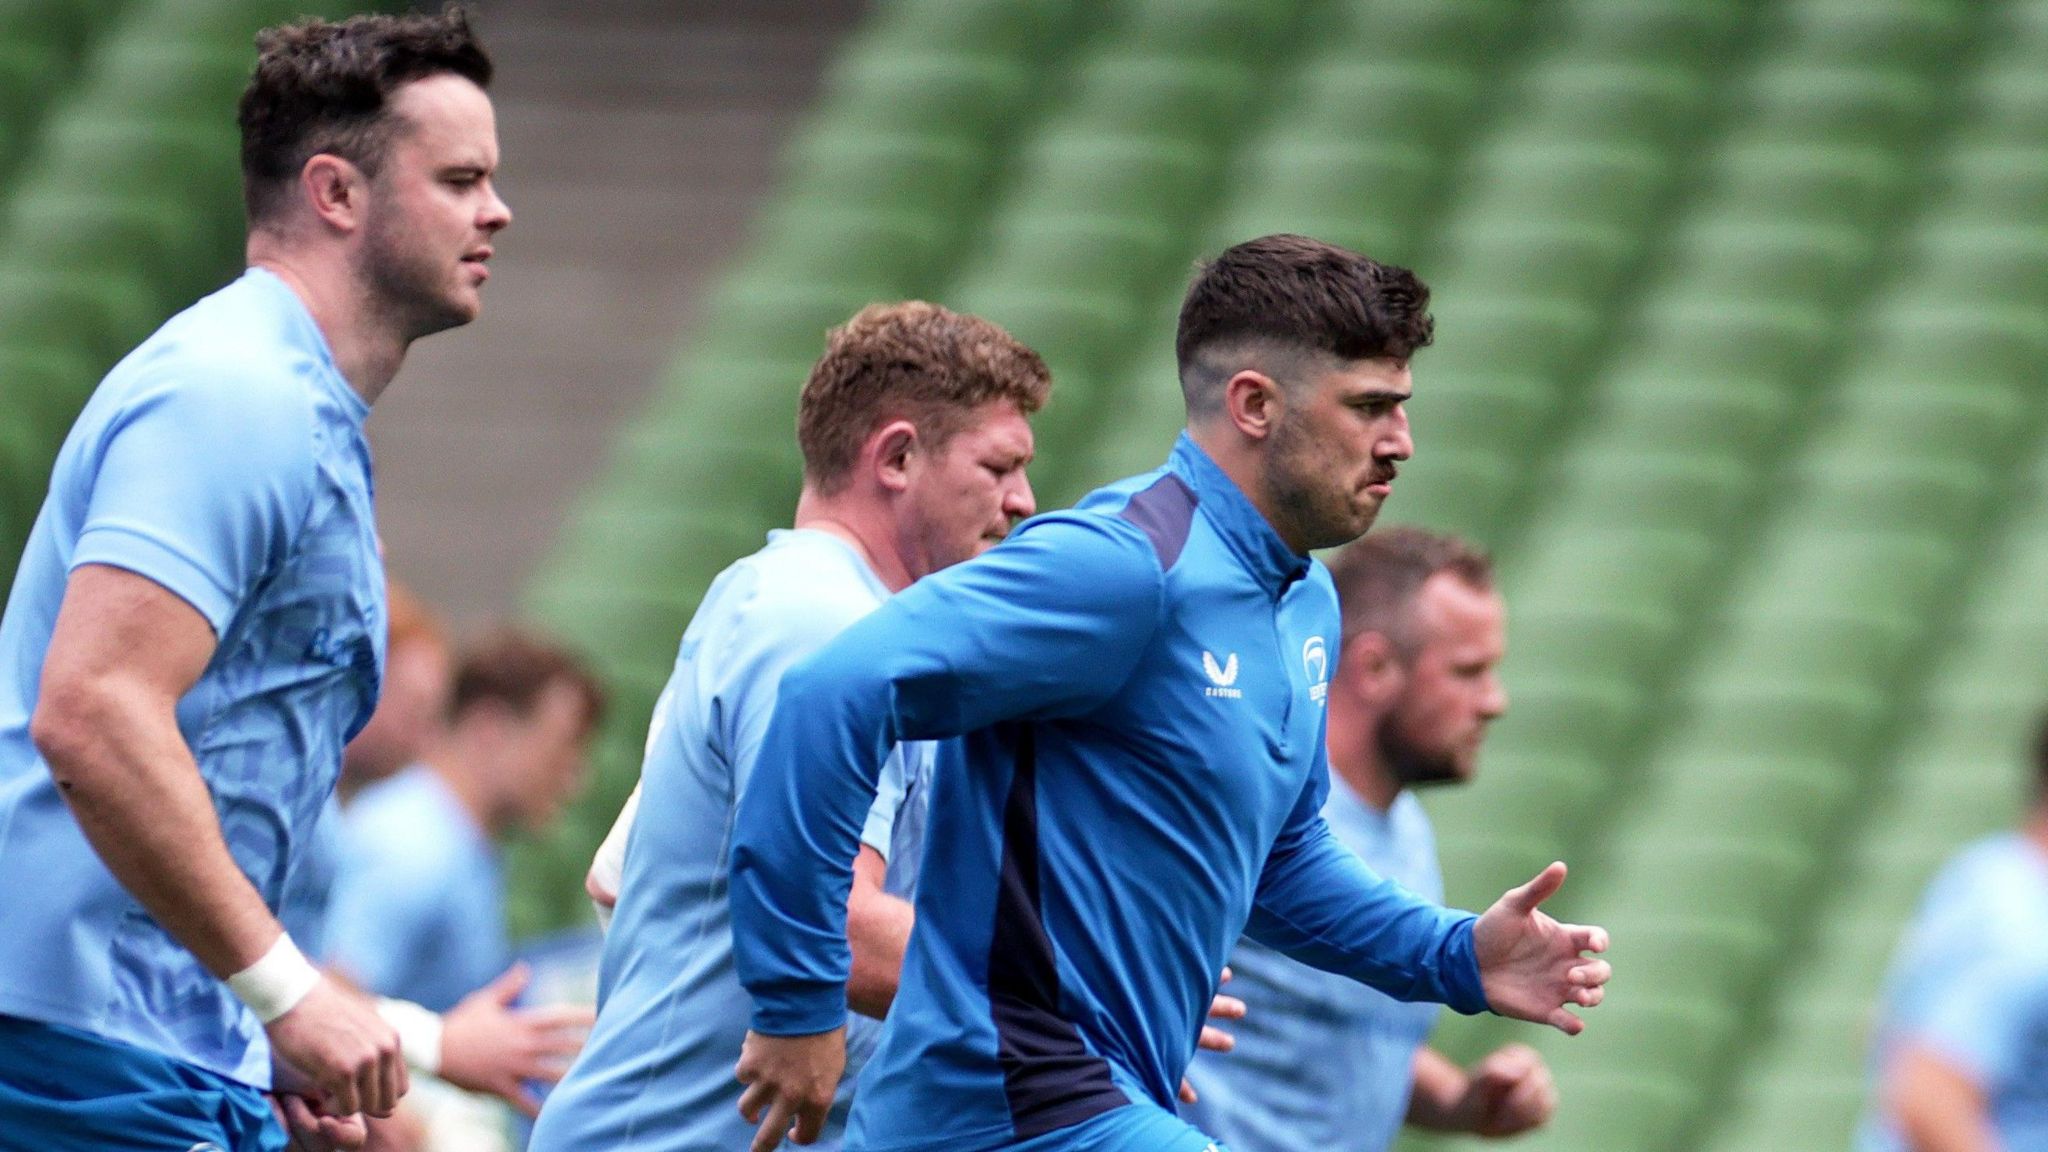 Jimmy O'Brien pictured during Leinster's captain's run session at the Aviva Stadium